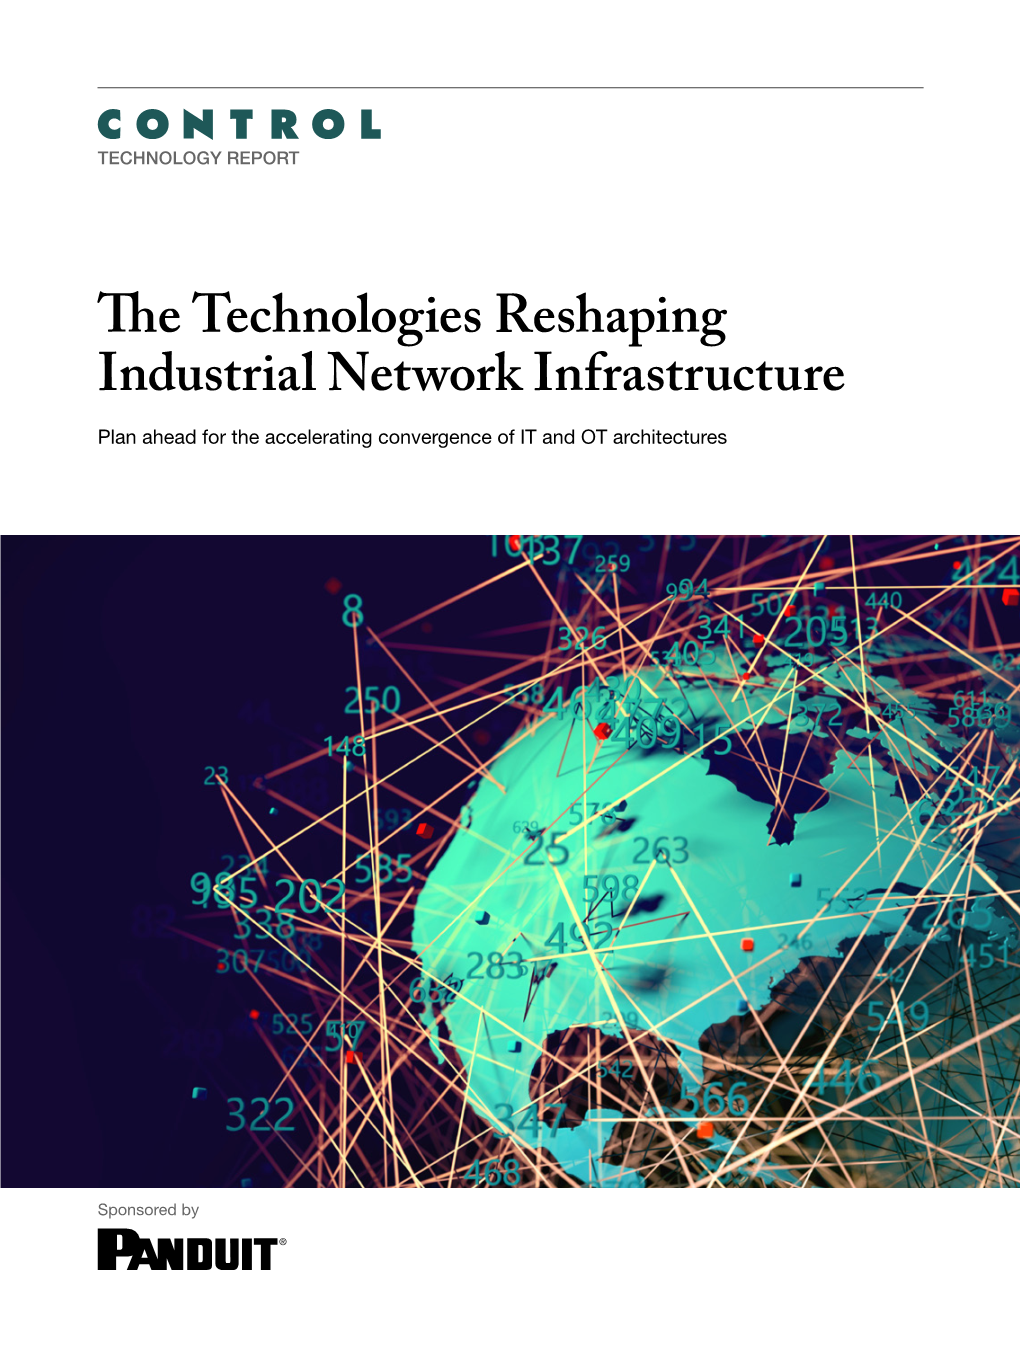 The Technologies Reshaping Industrial Network Infrastructure Plan Ahead for the Accelerating Convergence of IT and OT Architectures